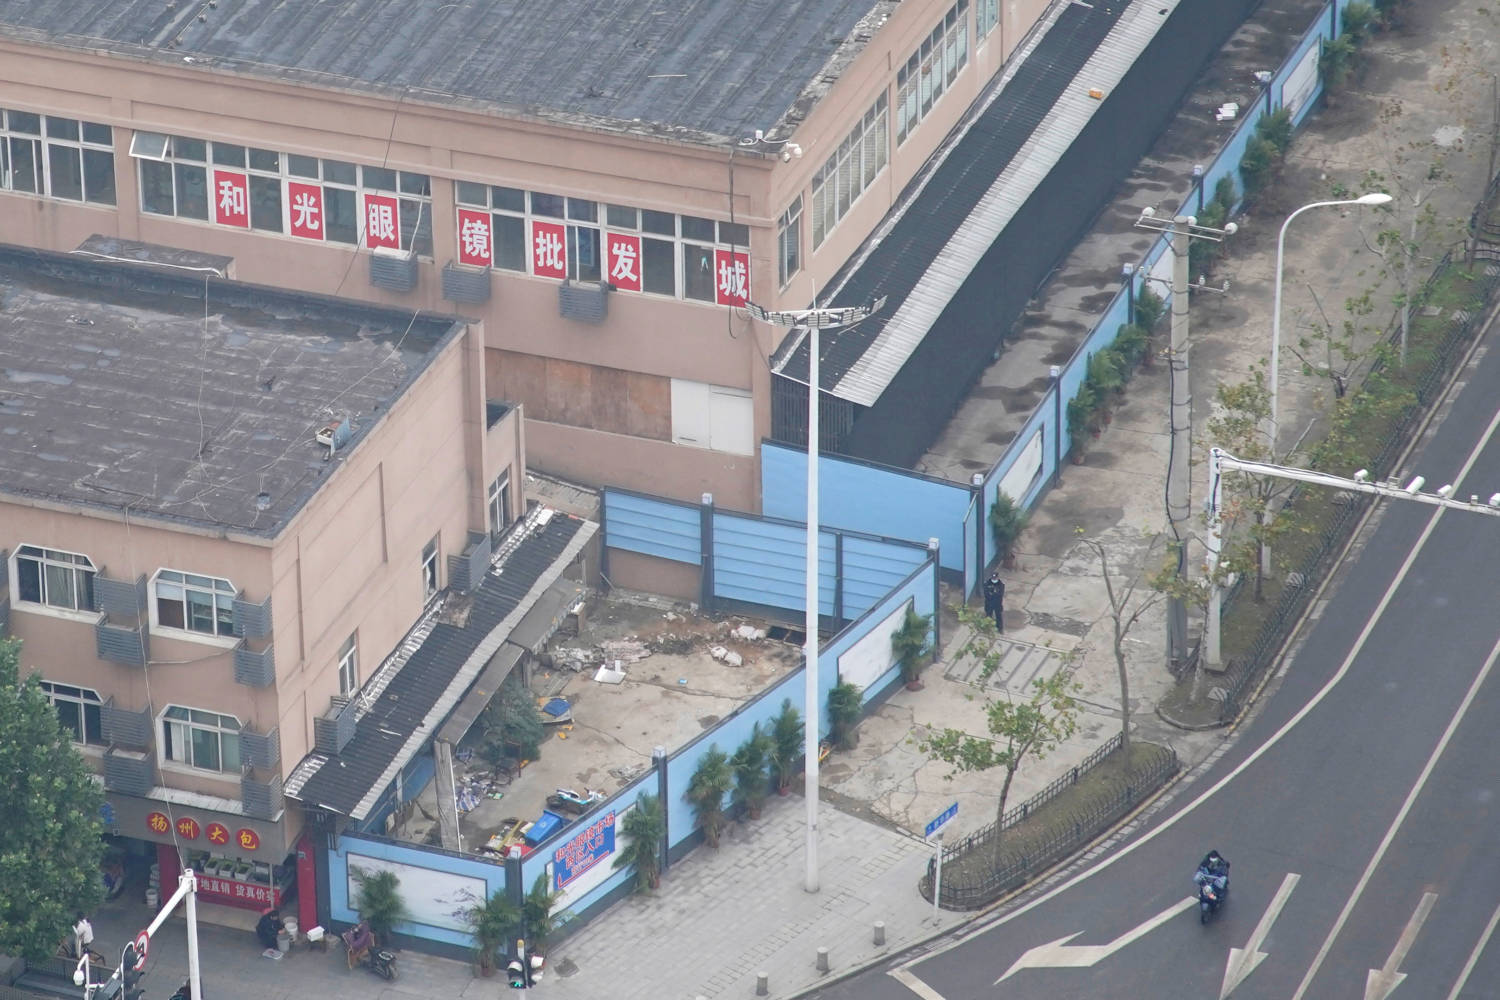 File Photo: The Building Of Huanan Seafood Market, Where The Second Floor Remains Open For Optics Stores, And Where Coronavirus Believed To Have First Surfaced, Almost A Year After The Start Of The Coronavirus Disease (covid 19) Outbreak, In Wuhan